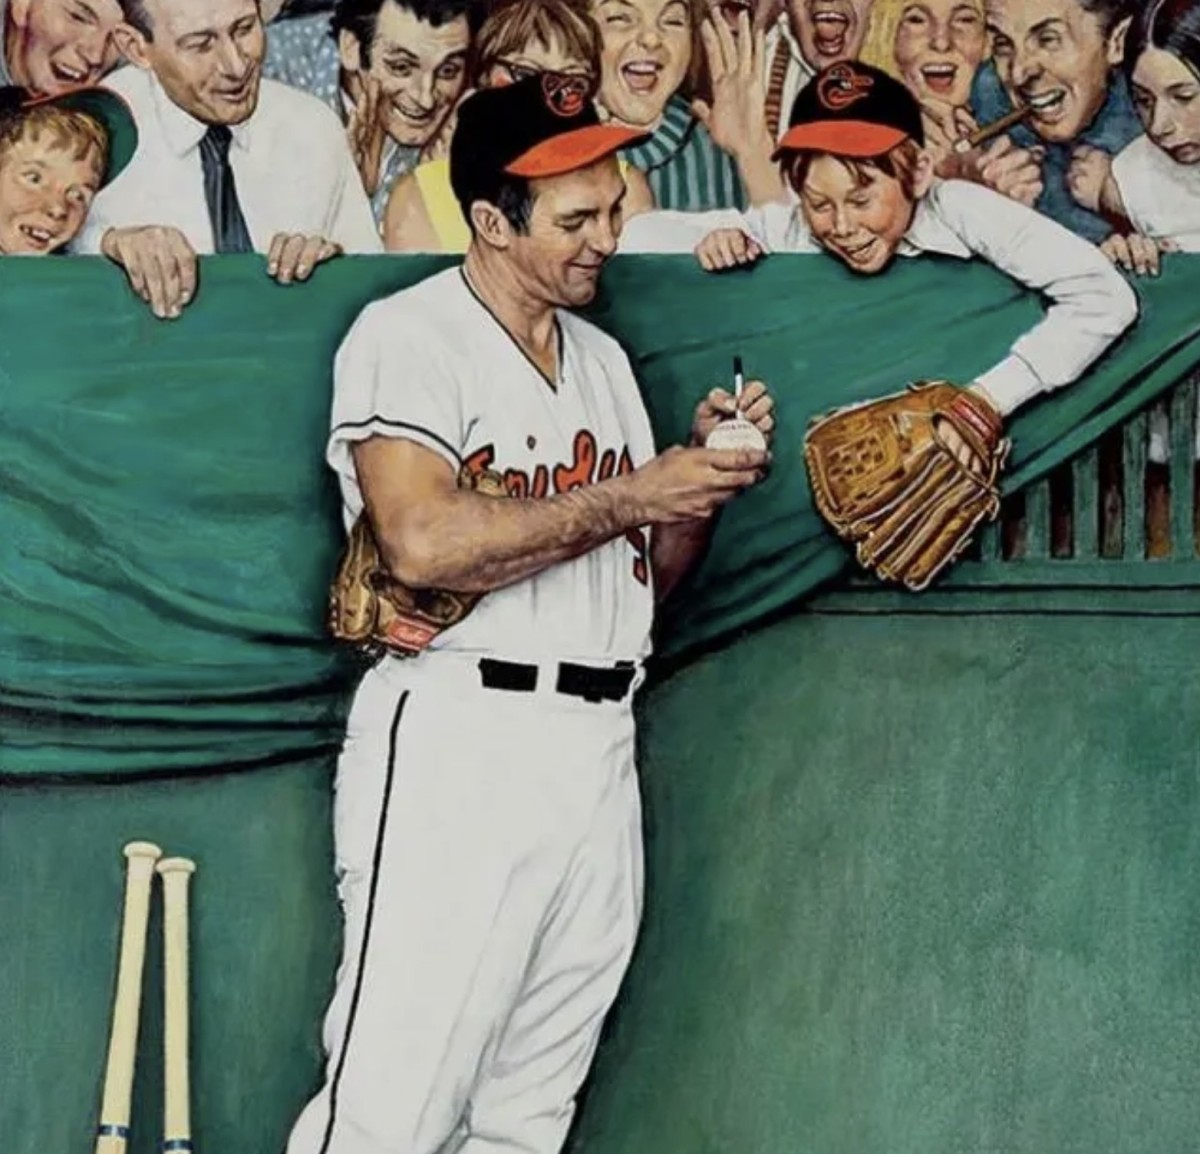 Brooks Robinson speaks with Orioles at Camden Yards